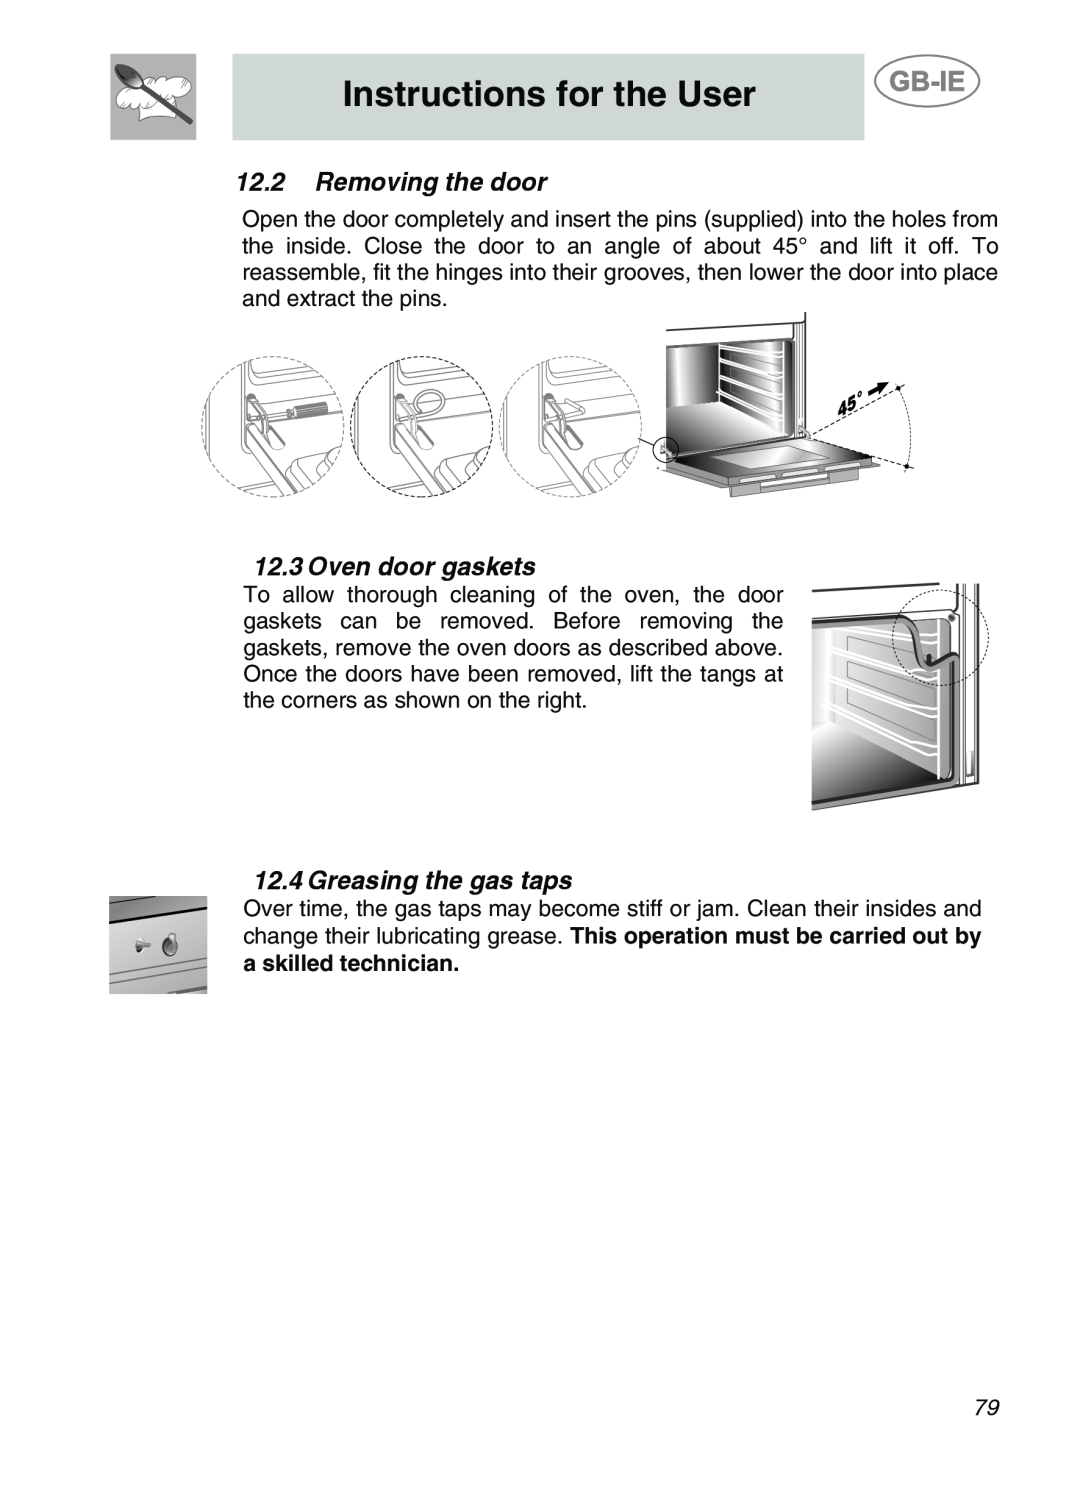 Smeg CS122-6 manual Removing the door, Oven door gaskets, Greasing the gas taps, Instructions for the User 